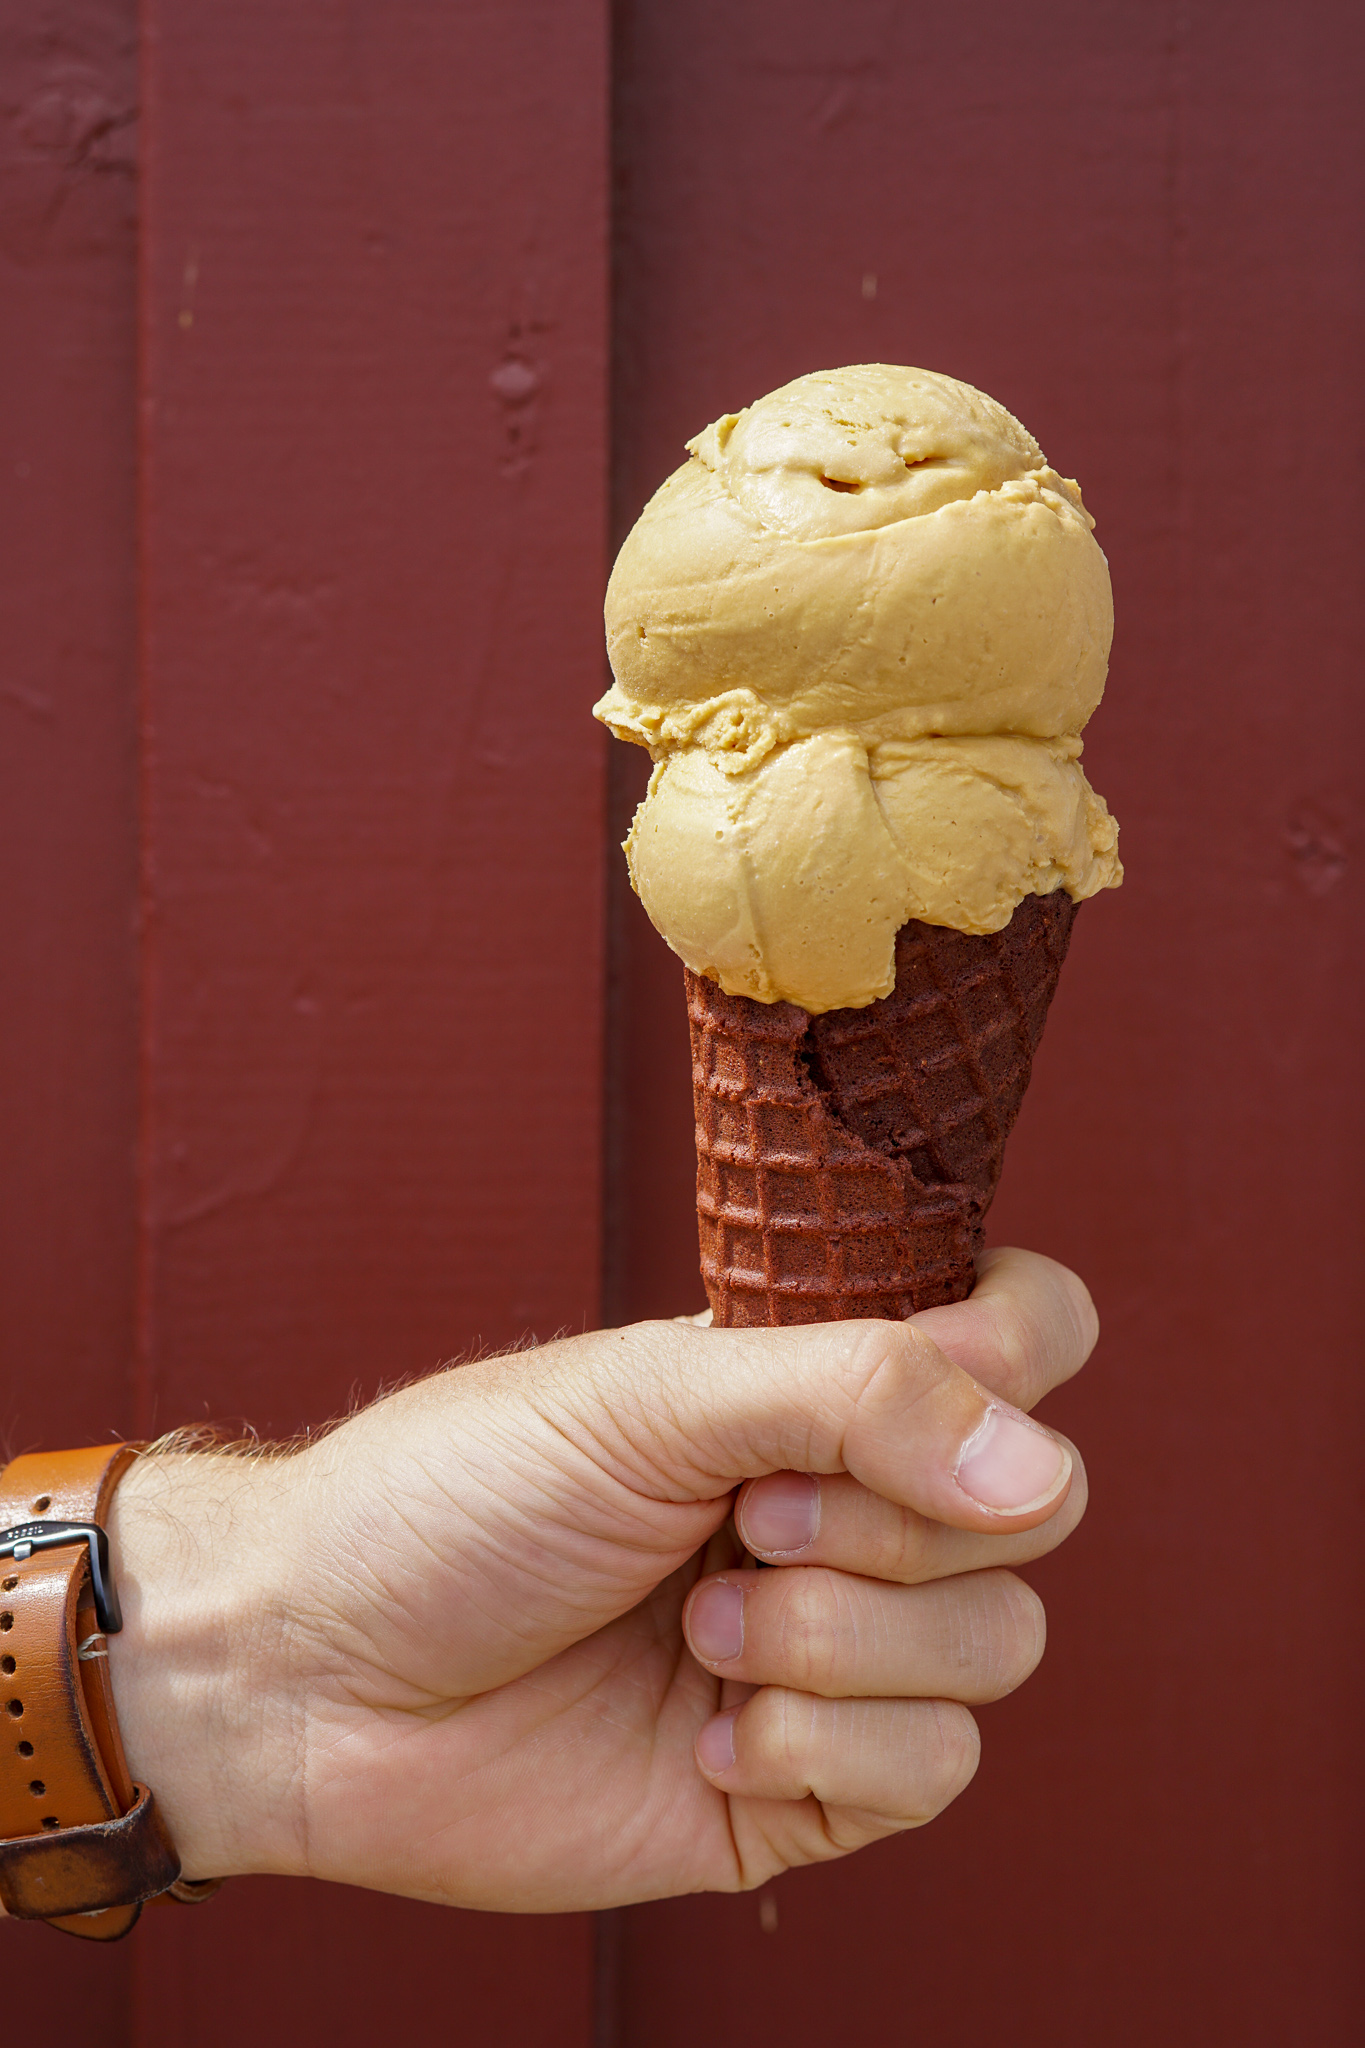 Man's hand holding a chocolate cone topped with 2 scoops of Salted Caramel ice cream